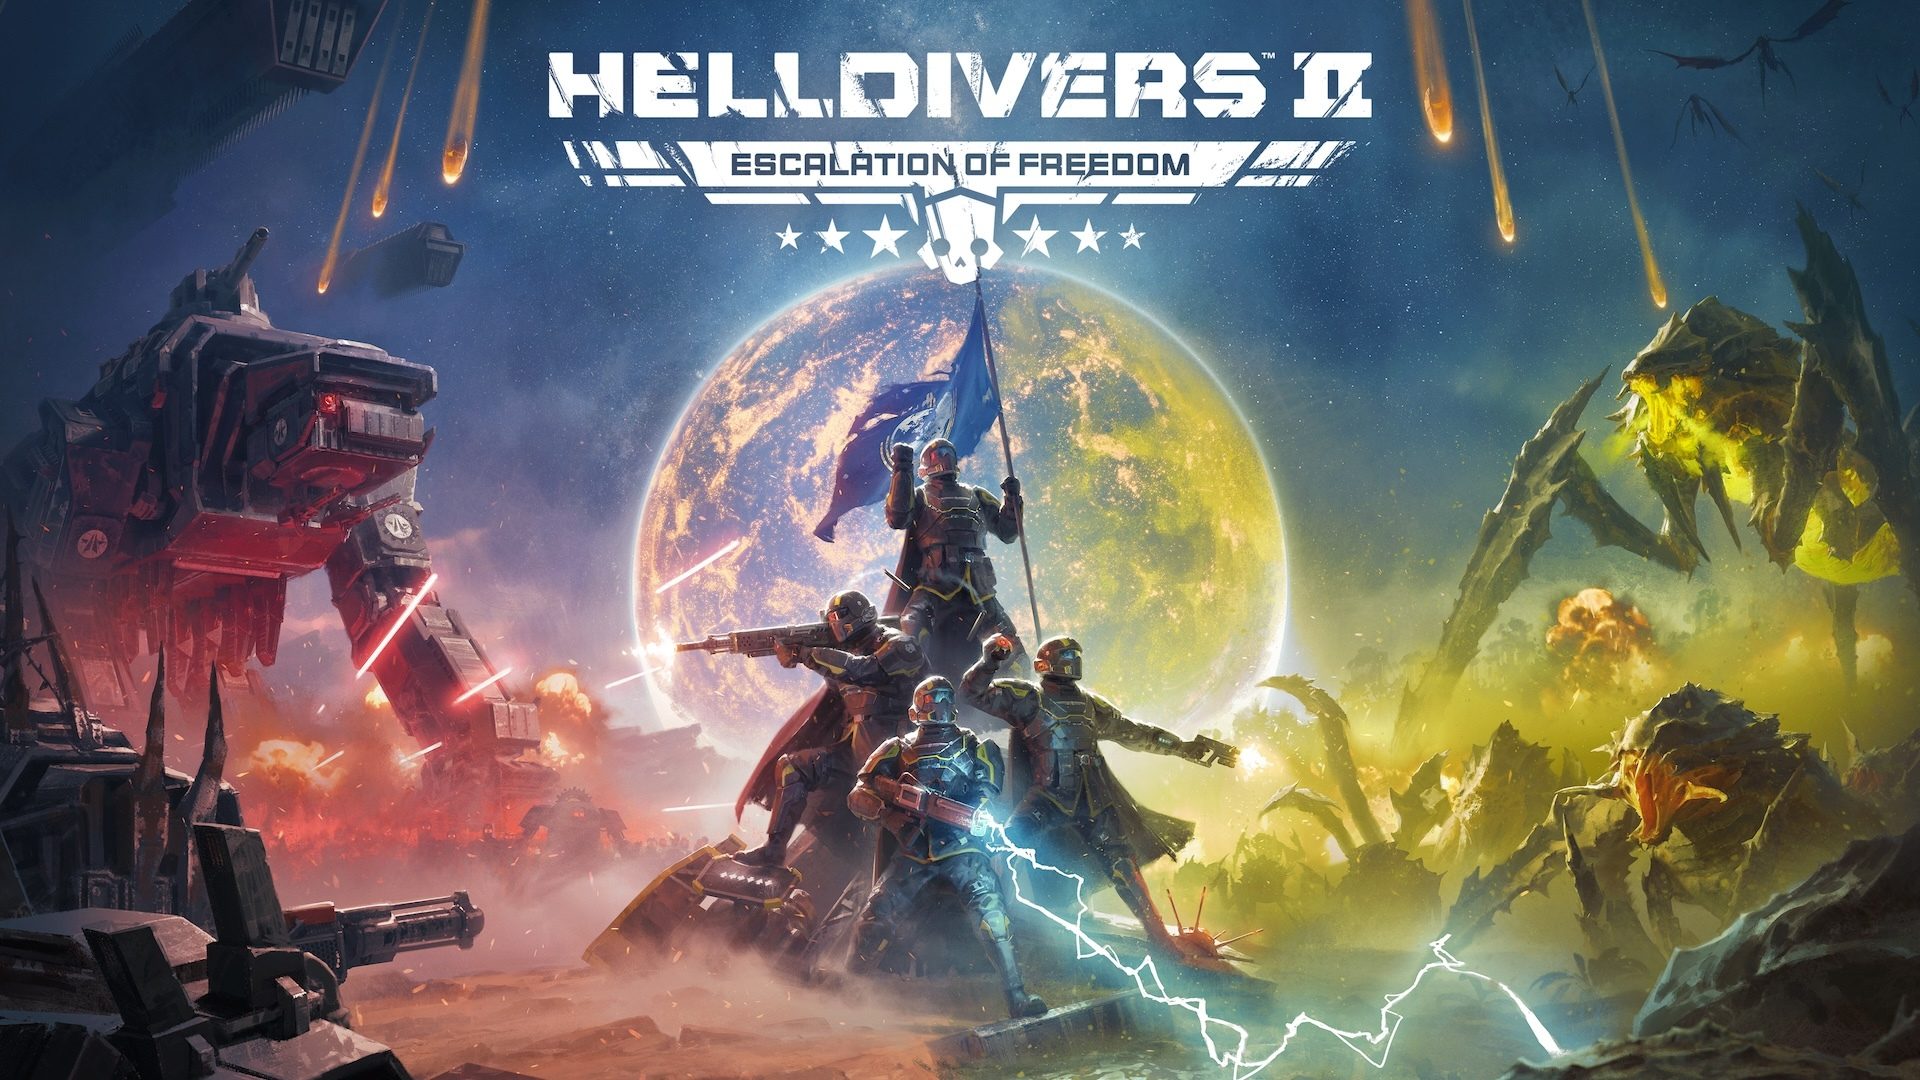 Helldivers 2’s biggest update yet, Escalation of Freedom, drops August 6